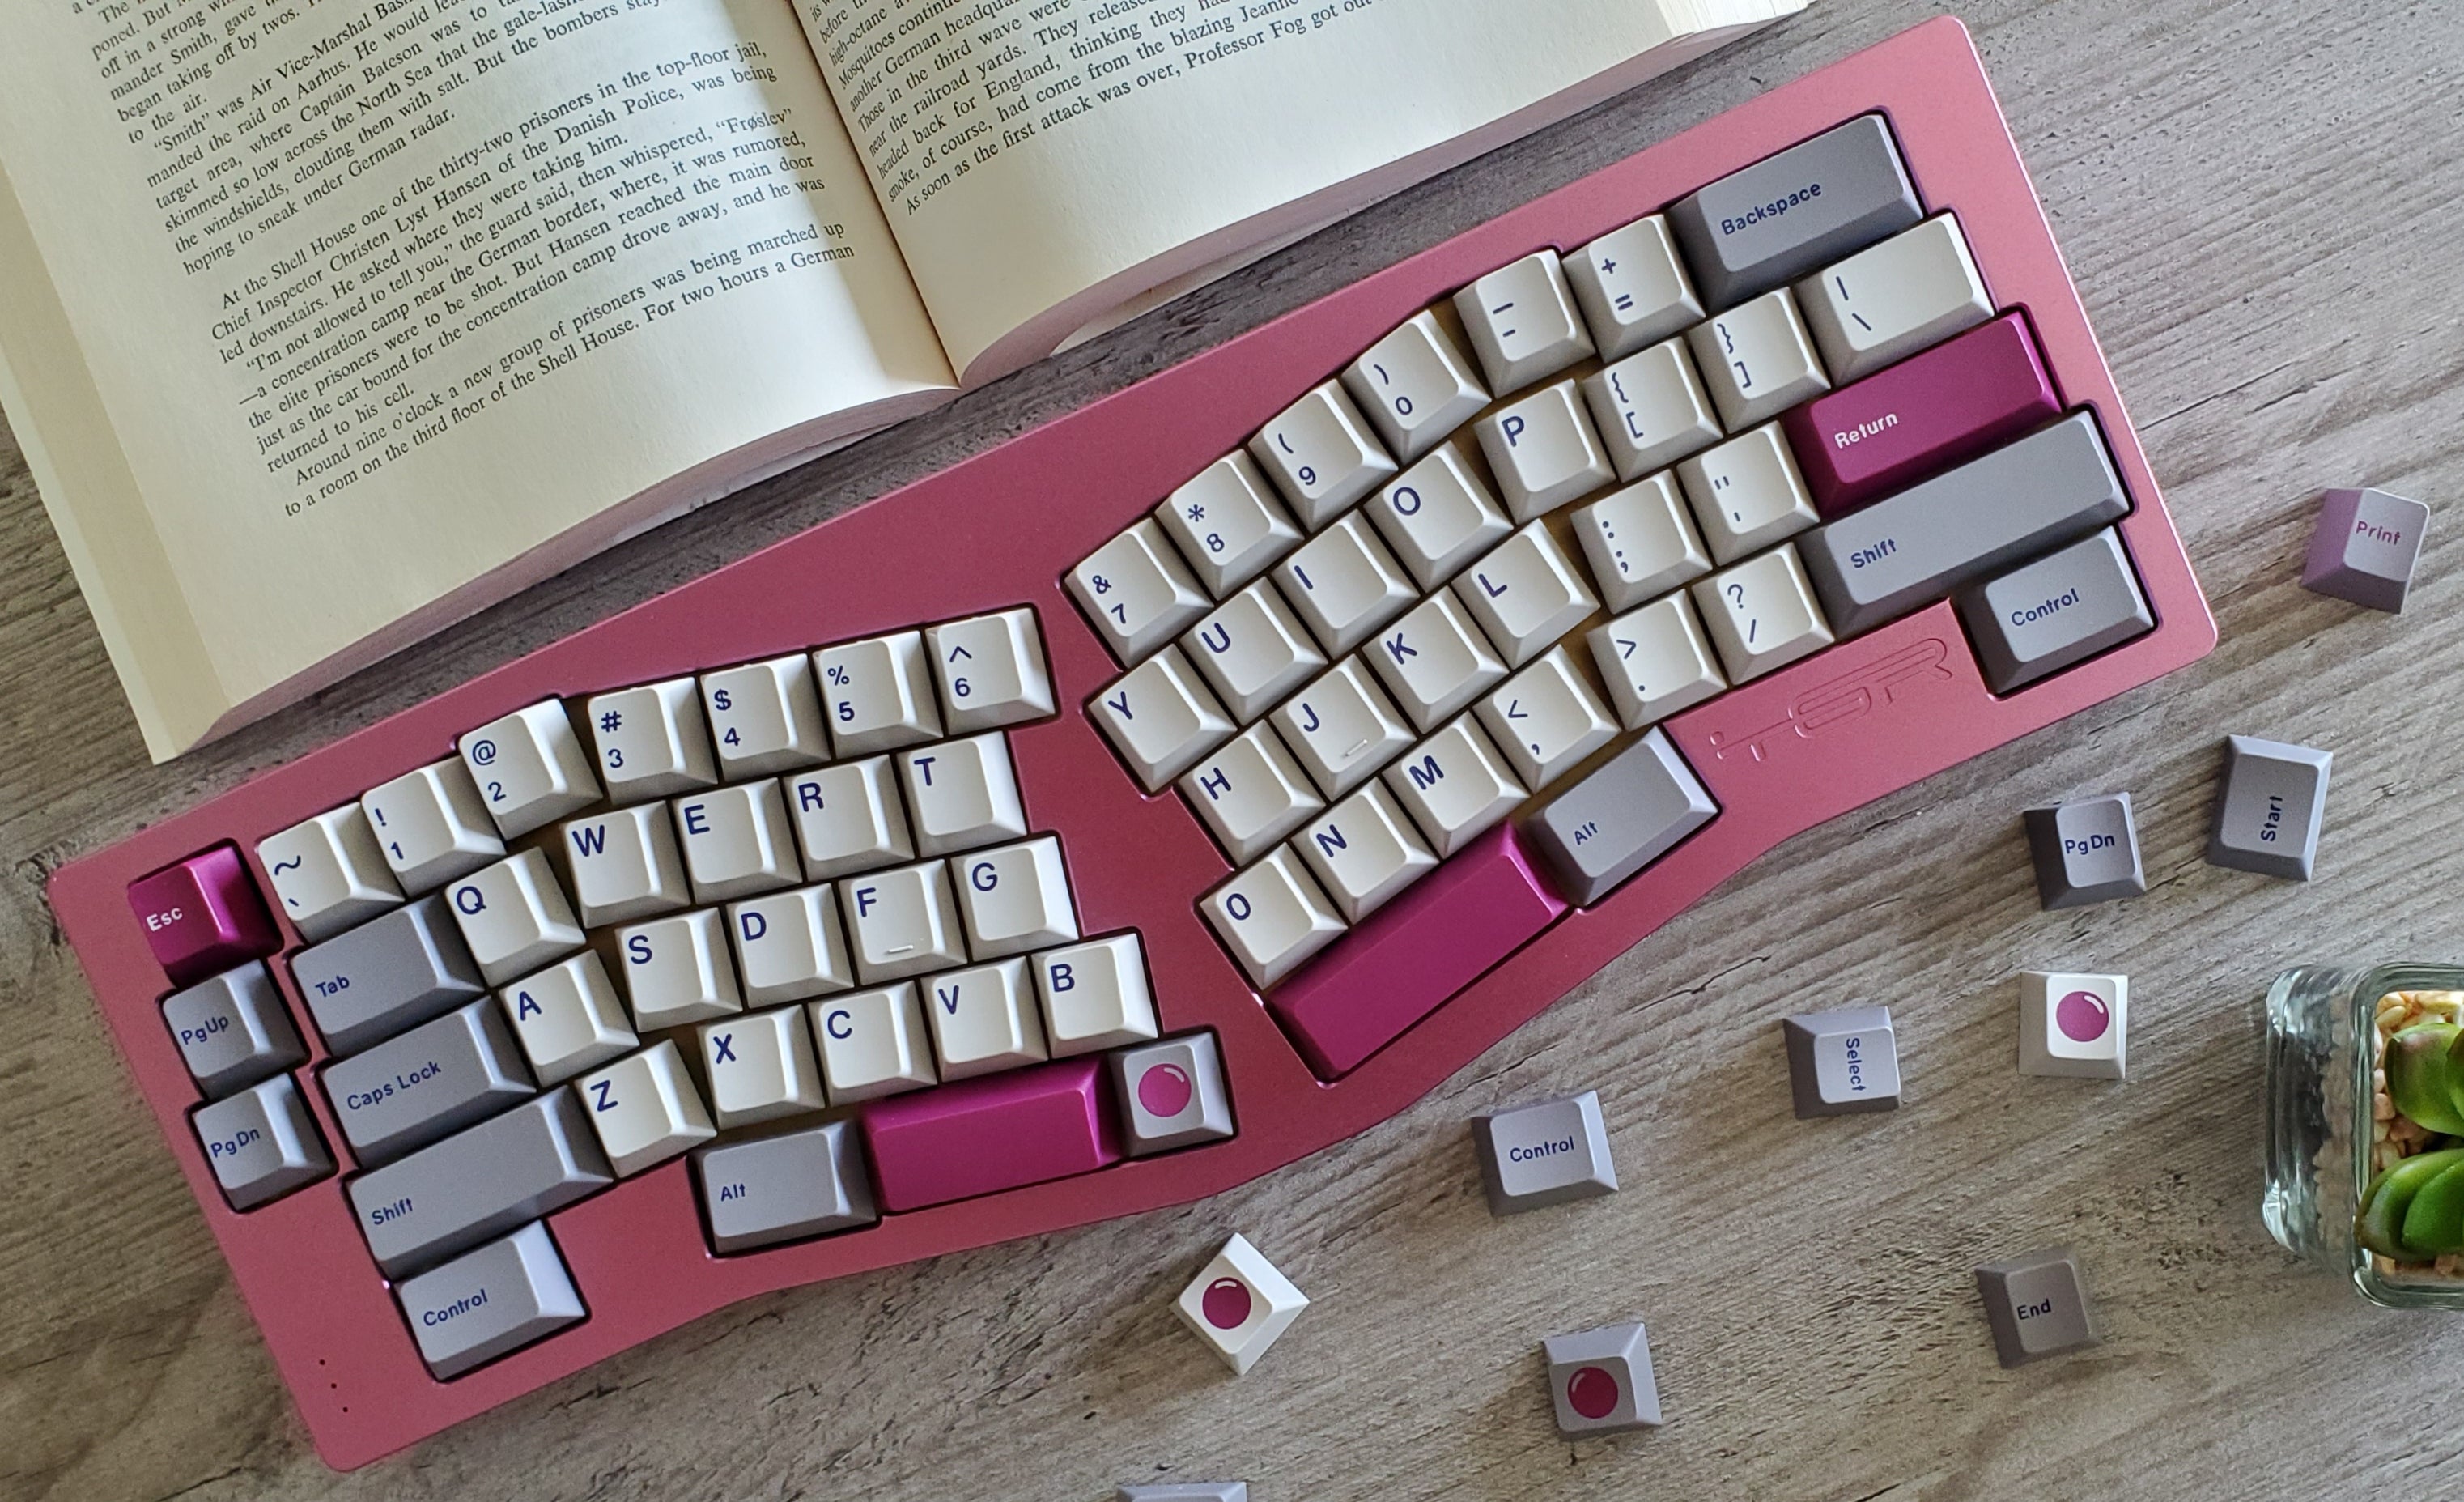 GMK DMG on Alice TRG with book and plant